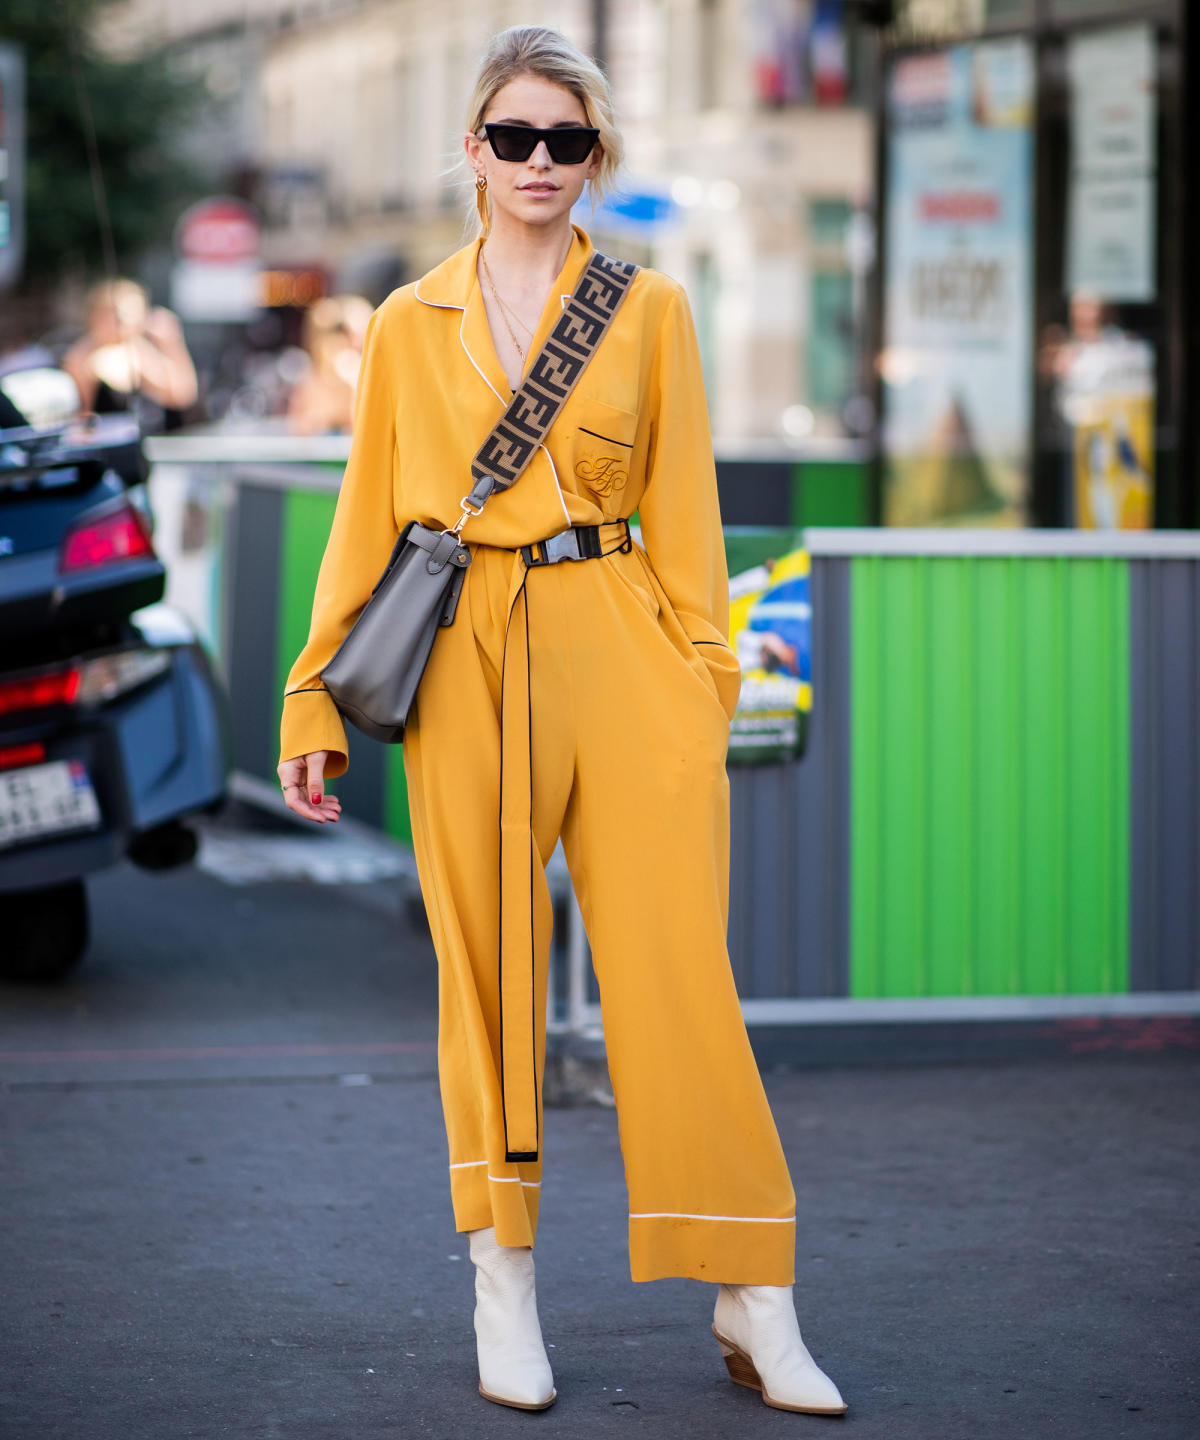 A Guide to the Best Jumpsuits for Tall Women